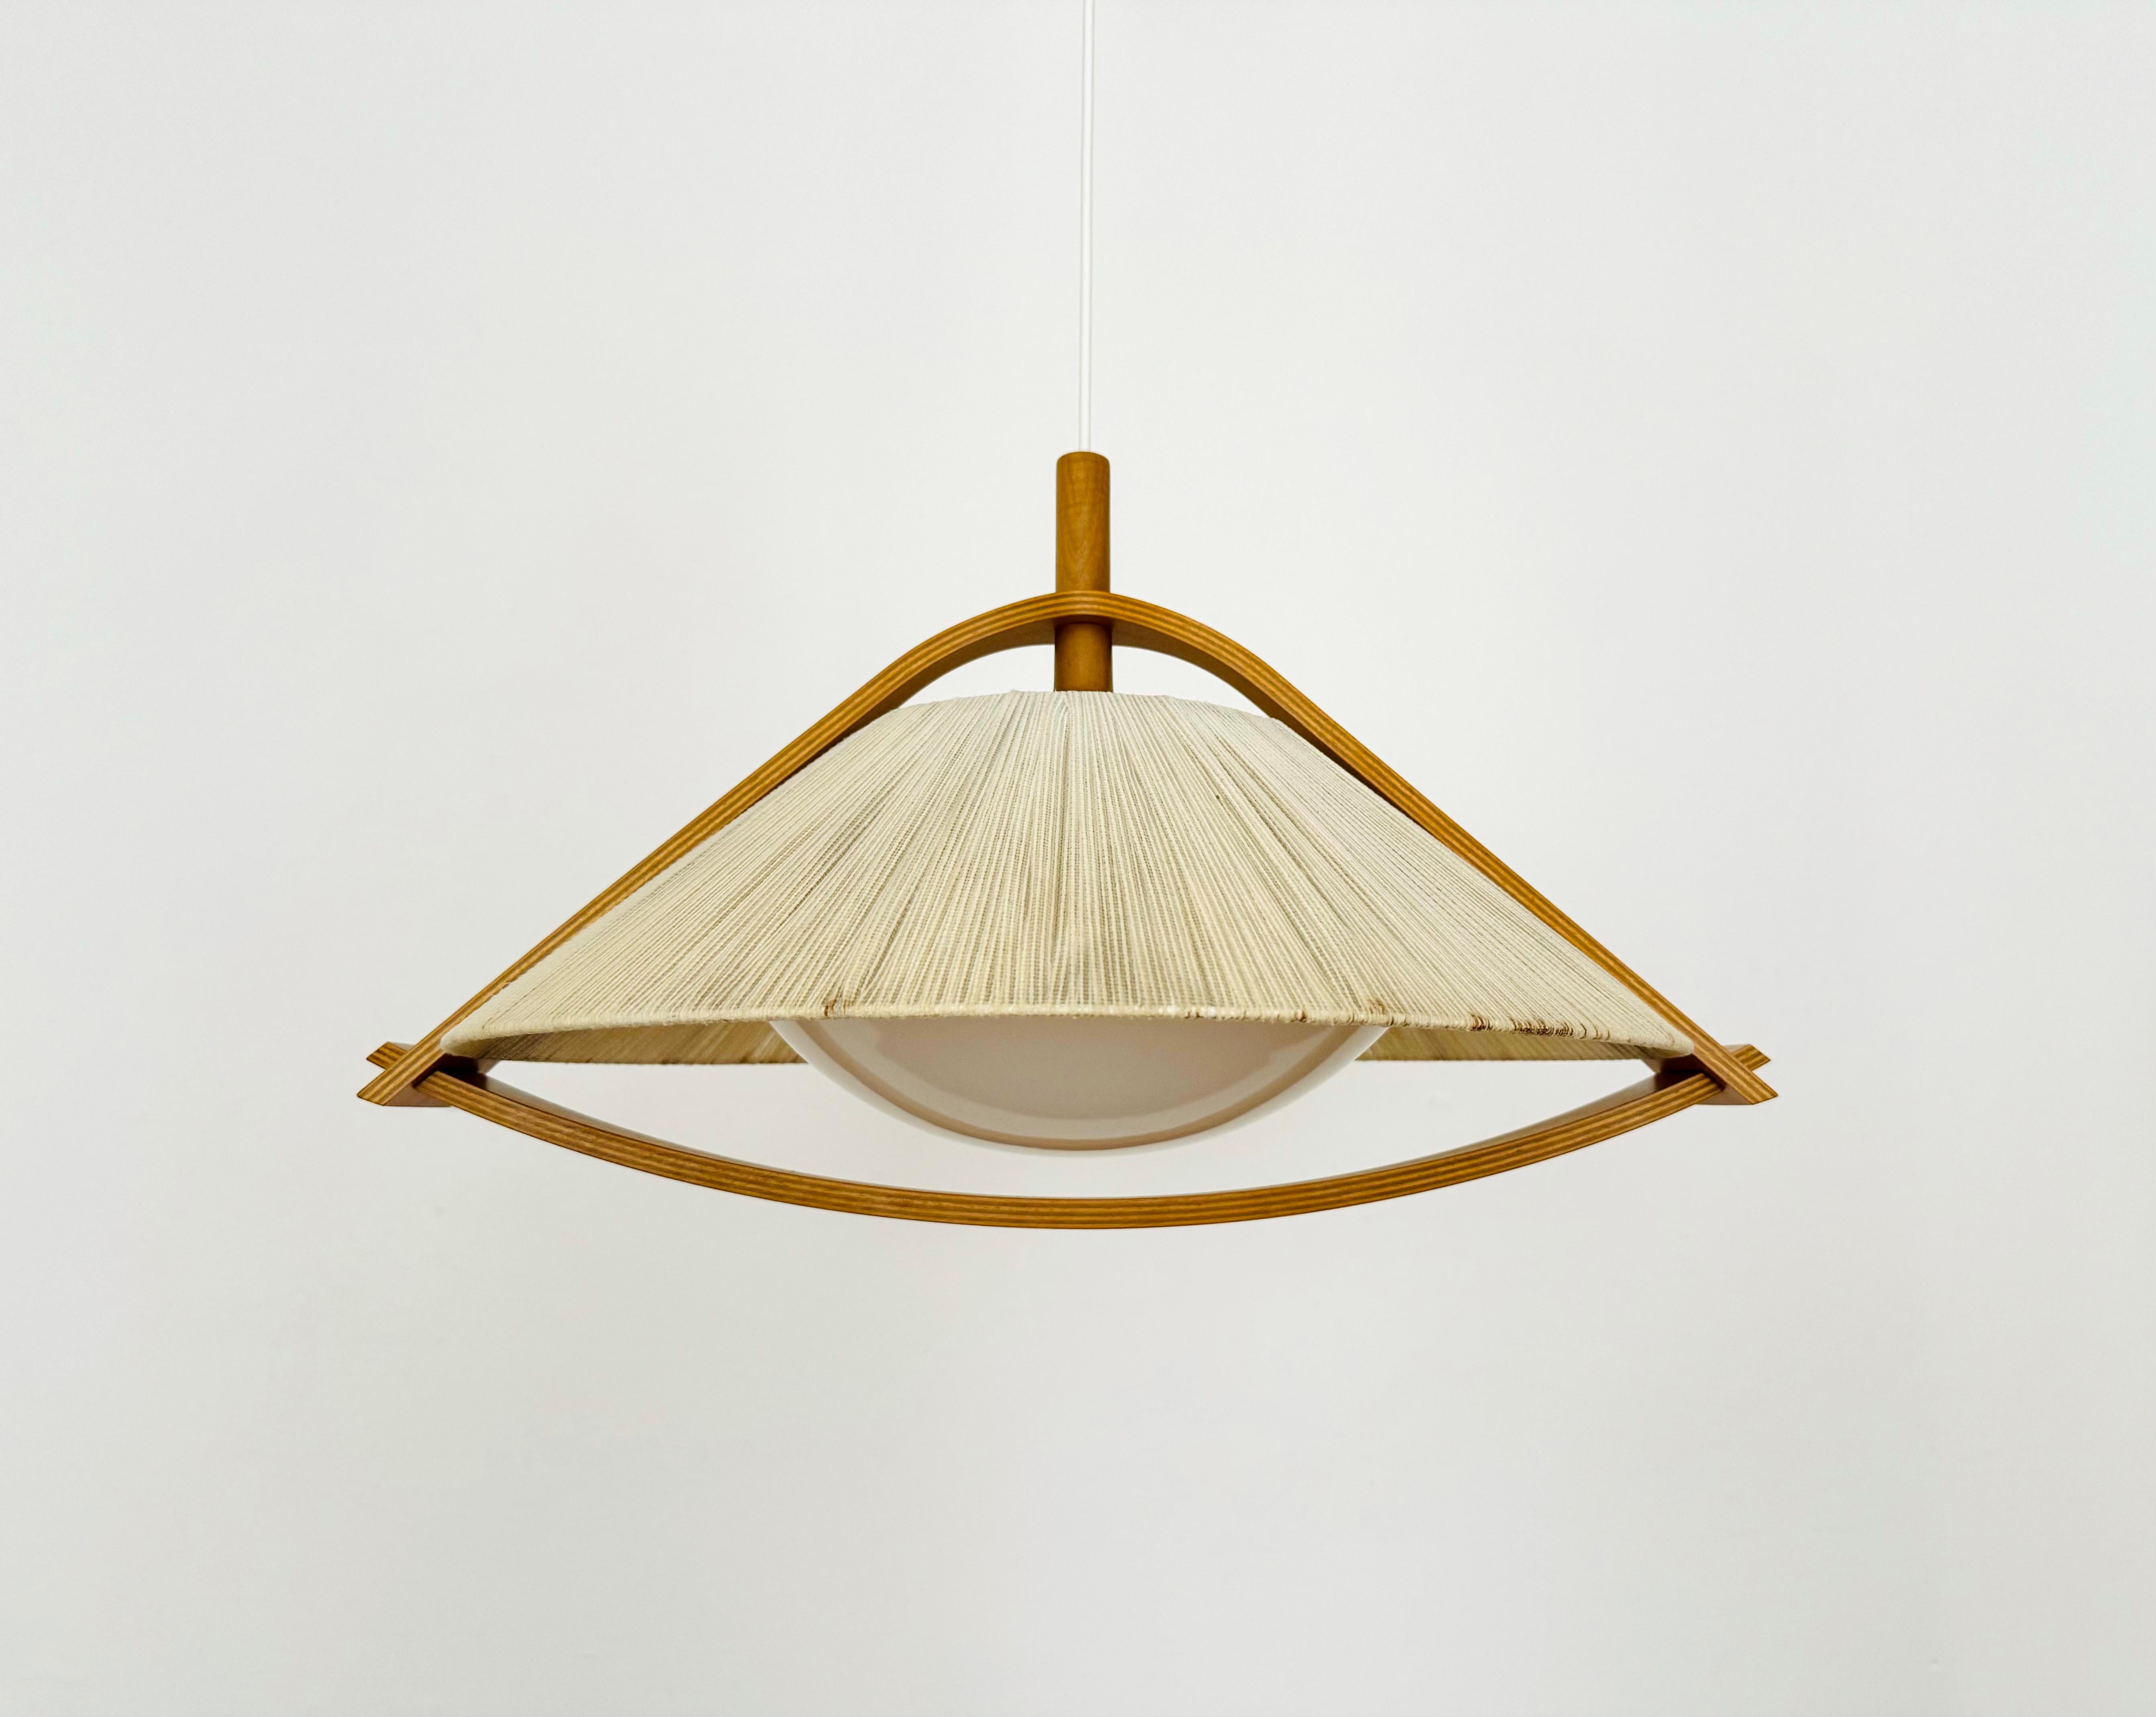 Exceptionally beautiful and large pendant lamp from the 1960s.
The design is very unusual.
The shape and materials create a warm and very pleasant light.

Condition:

Very good vintage condition with slight signs of age-related wear.
The raffia